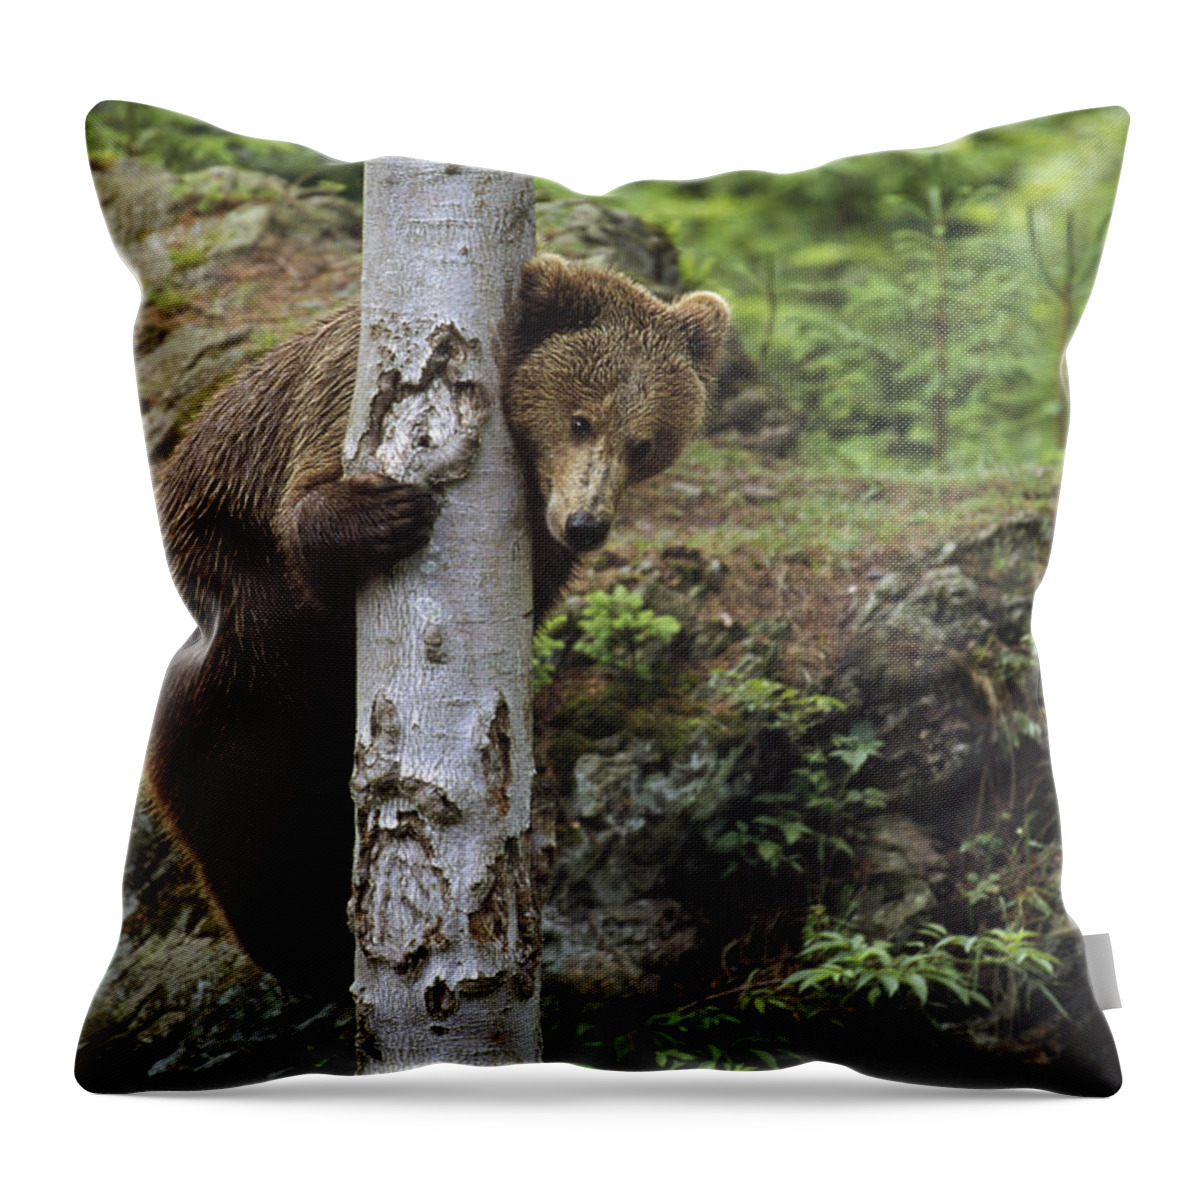 Feb0514 Throw Pillow featuring the photograph Brown Bear Adult Climbing A Tree by Konrad Wothe